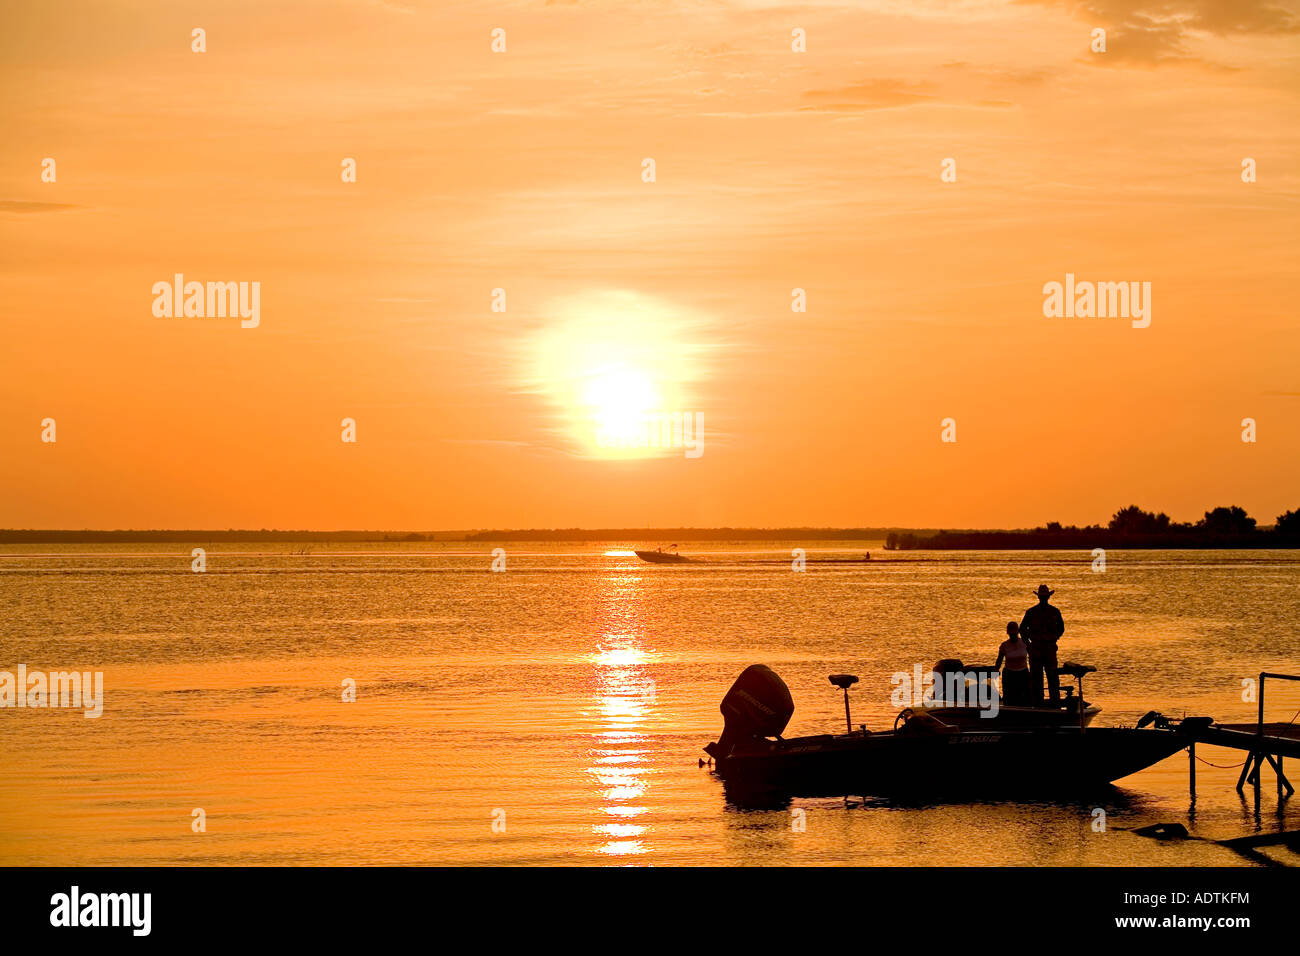 Fishing boat water ski sunset Texas Lake. Texas cowboy and wife standing in boat. Stock Photo